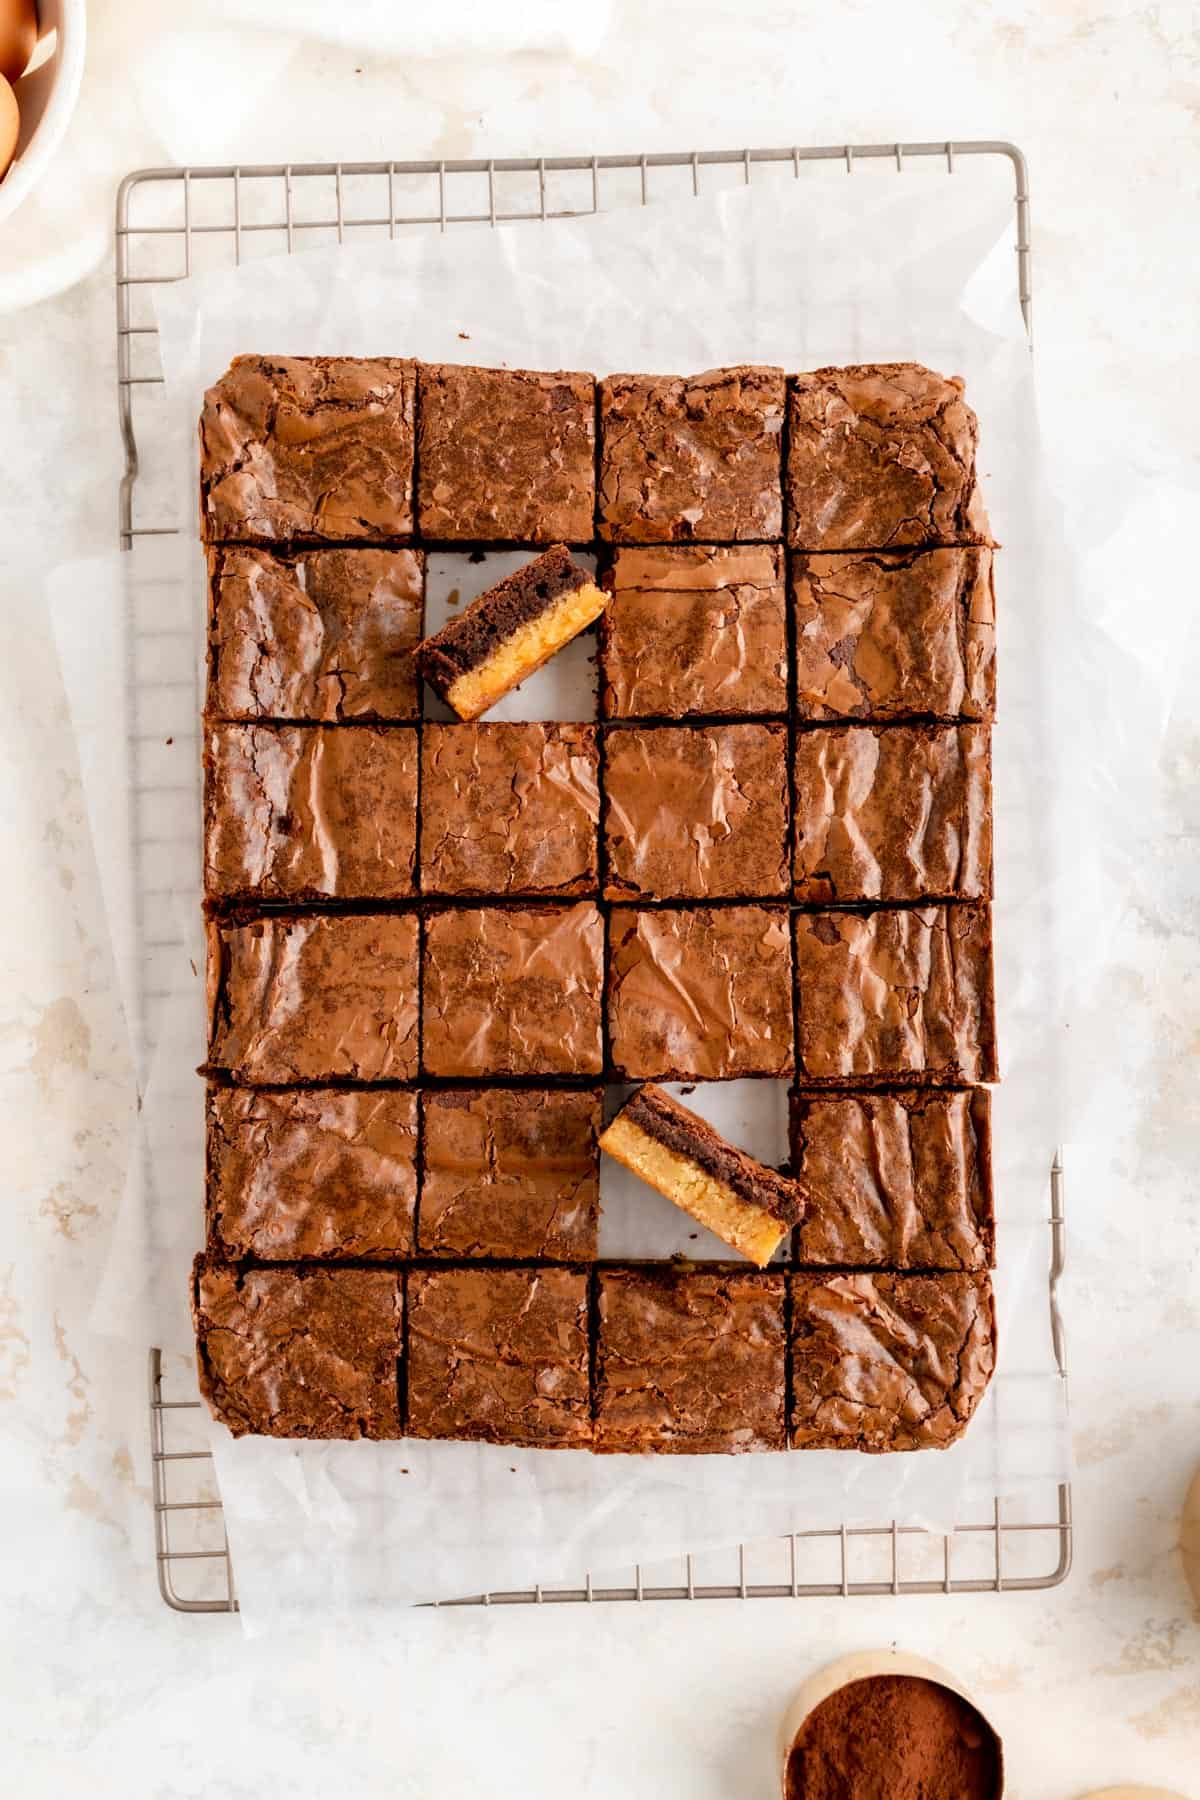 A full pan of brownies cut on a cooling rack with two brownies on their side.